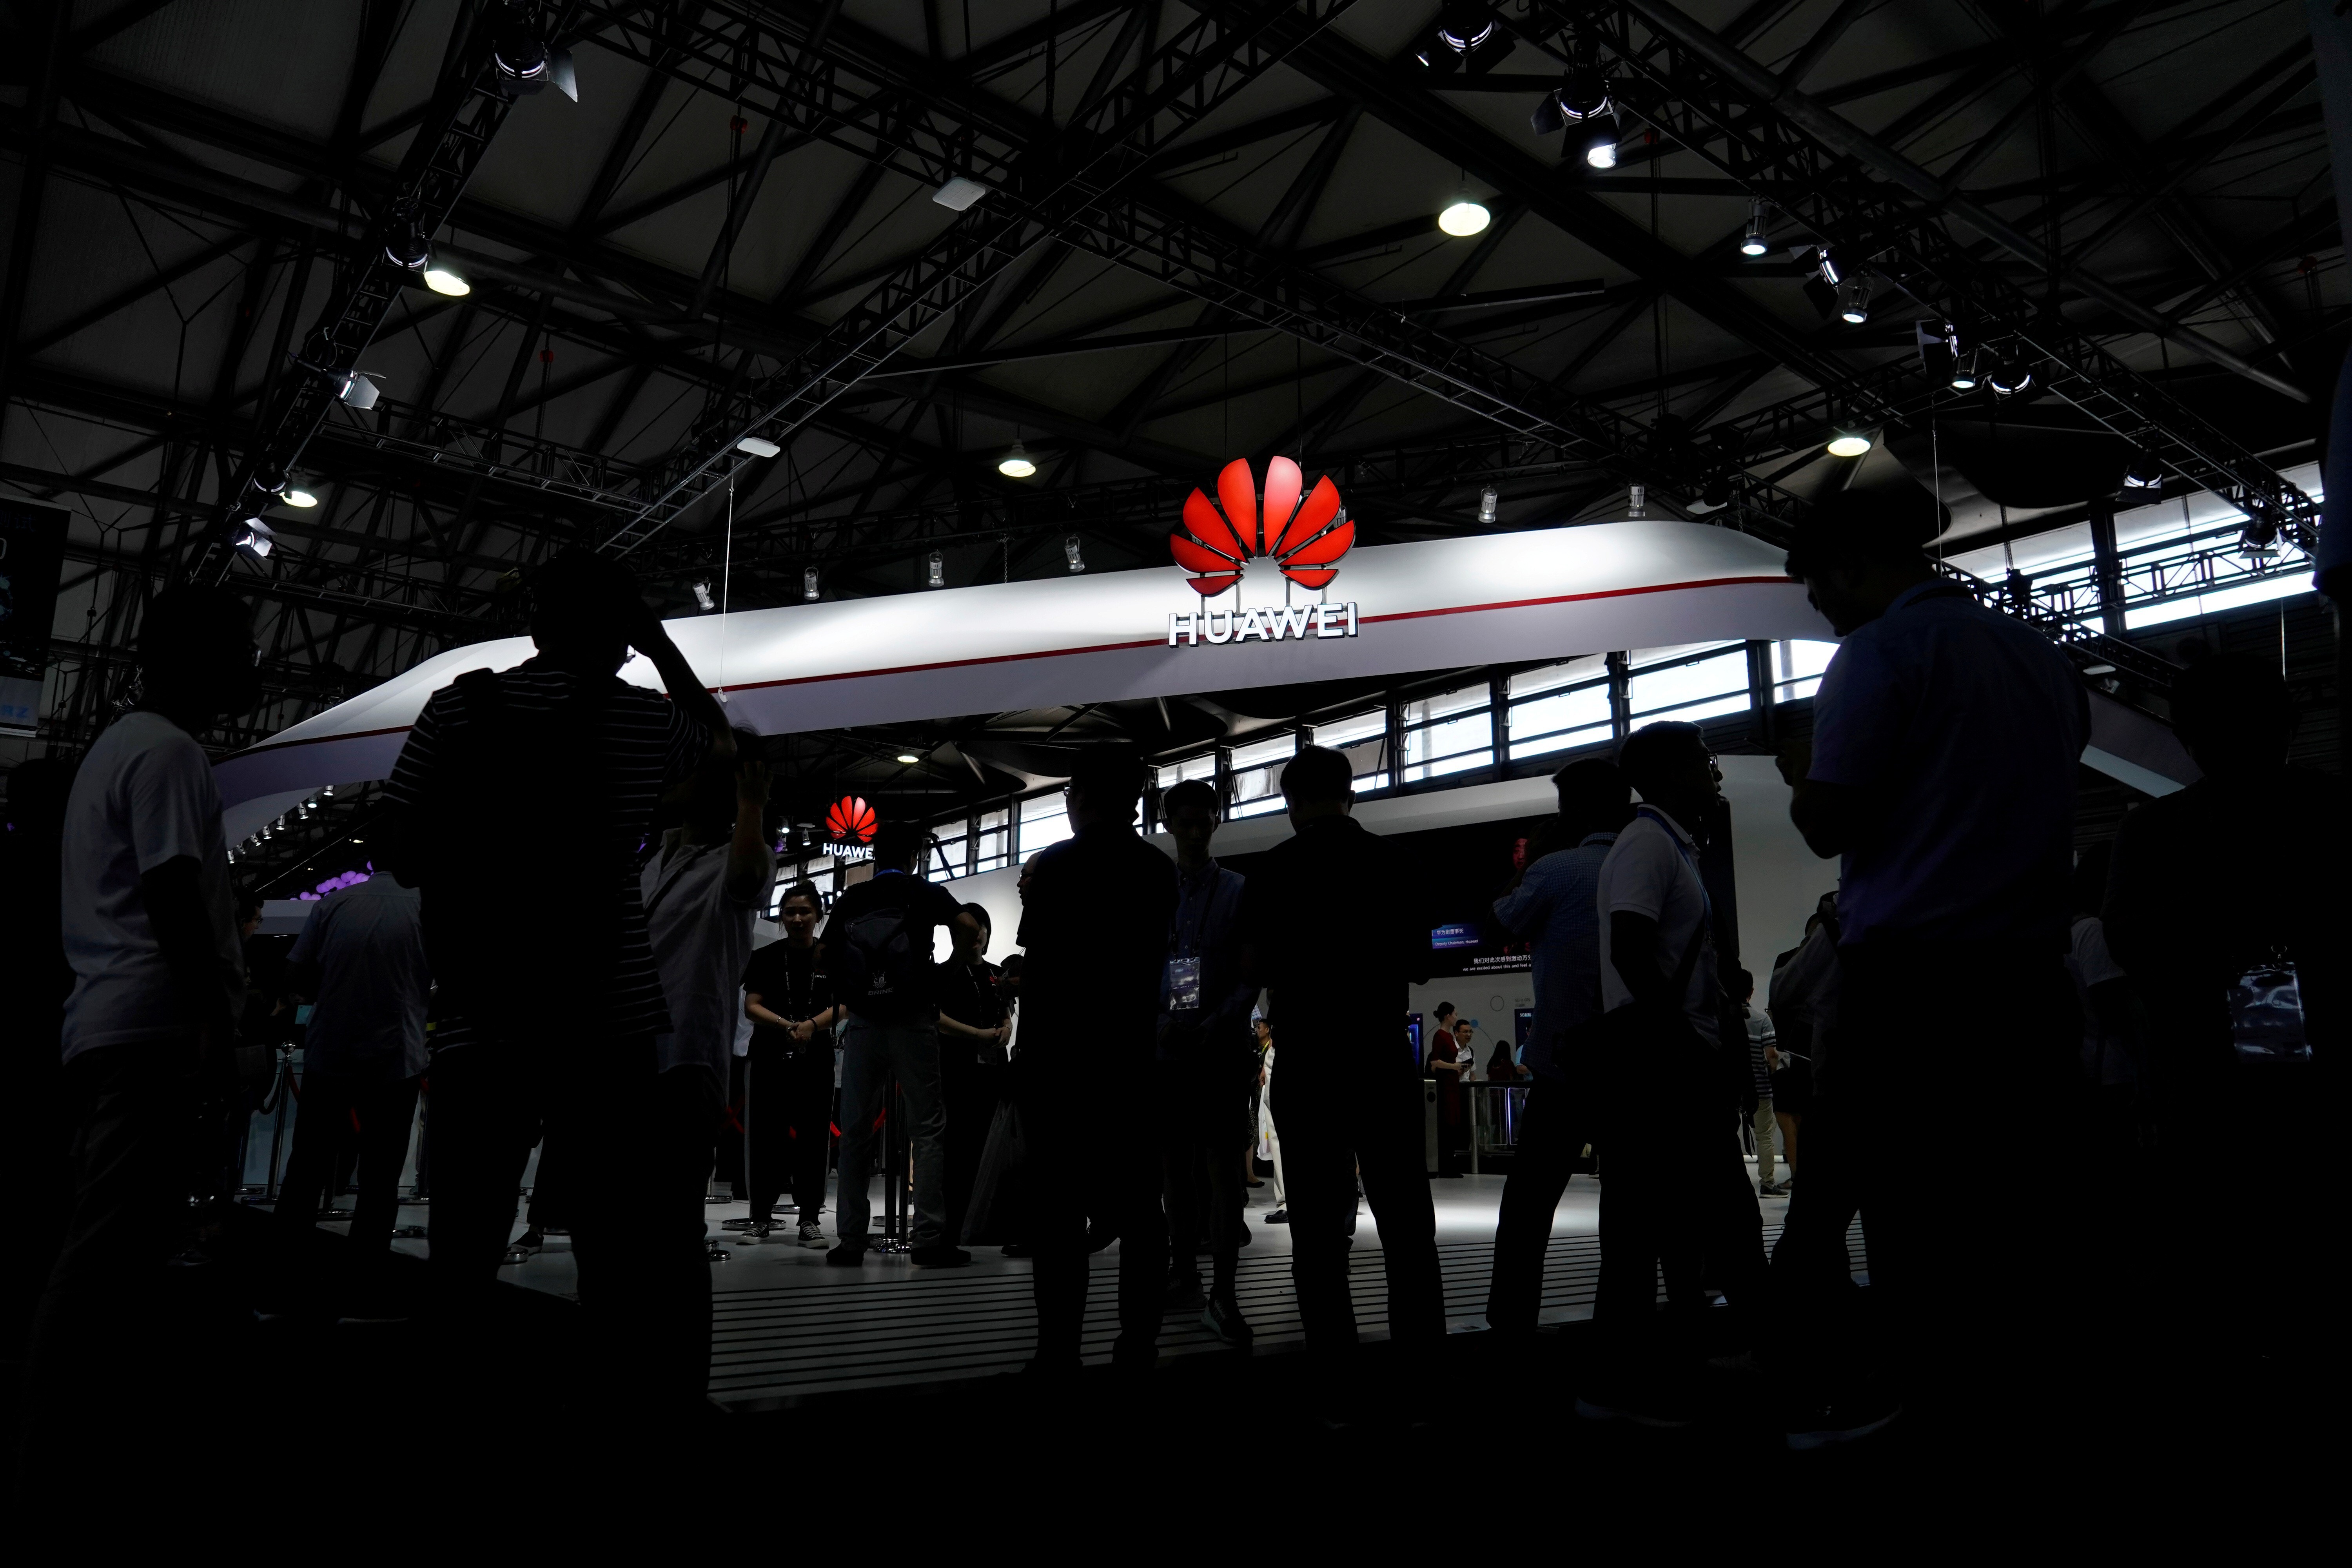 A Huawei logo is pictured at Mobile World Congress (MWC) in Shanghai, China June 28, 2019. File photo: Reuters